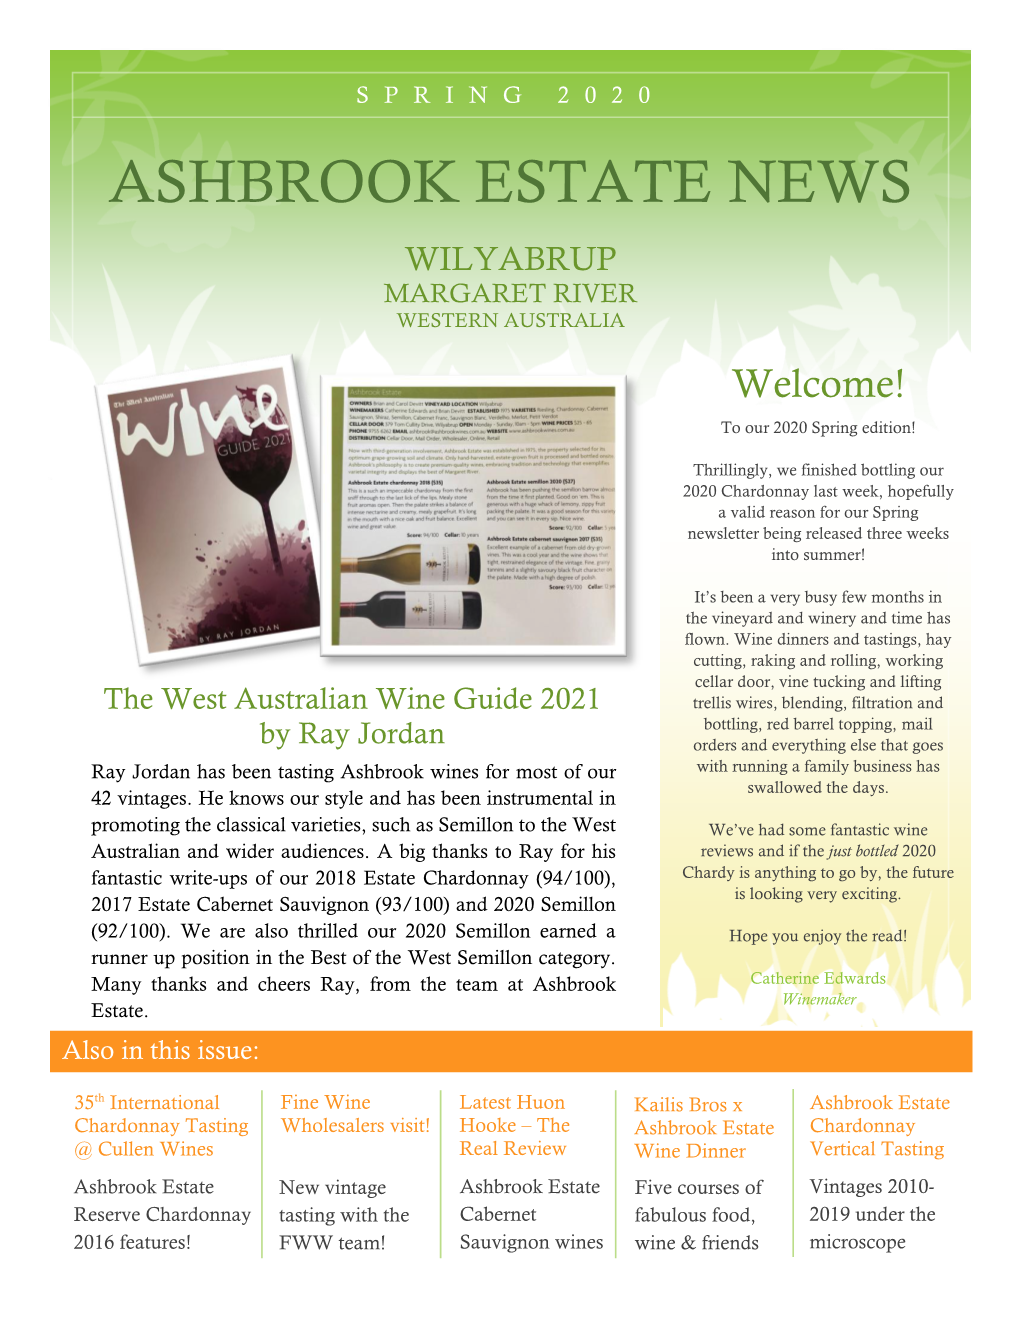 SPRING 2020 ASHBROOK ESTATE NEWS WILYABRUP MARGARET RIVER WESTERN AUSTRALIA Welcome! to Our 2020 Spring Edition!